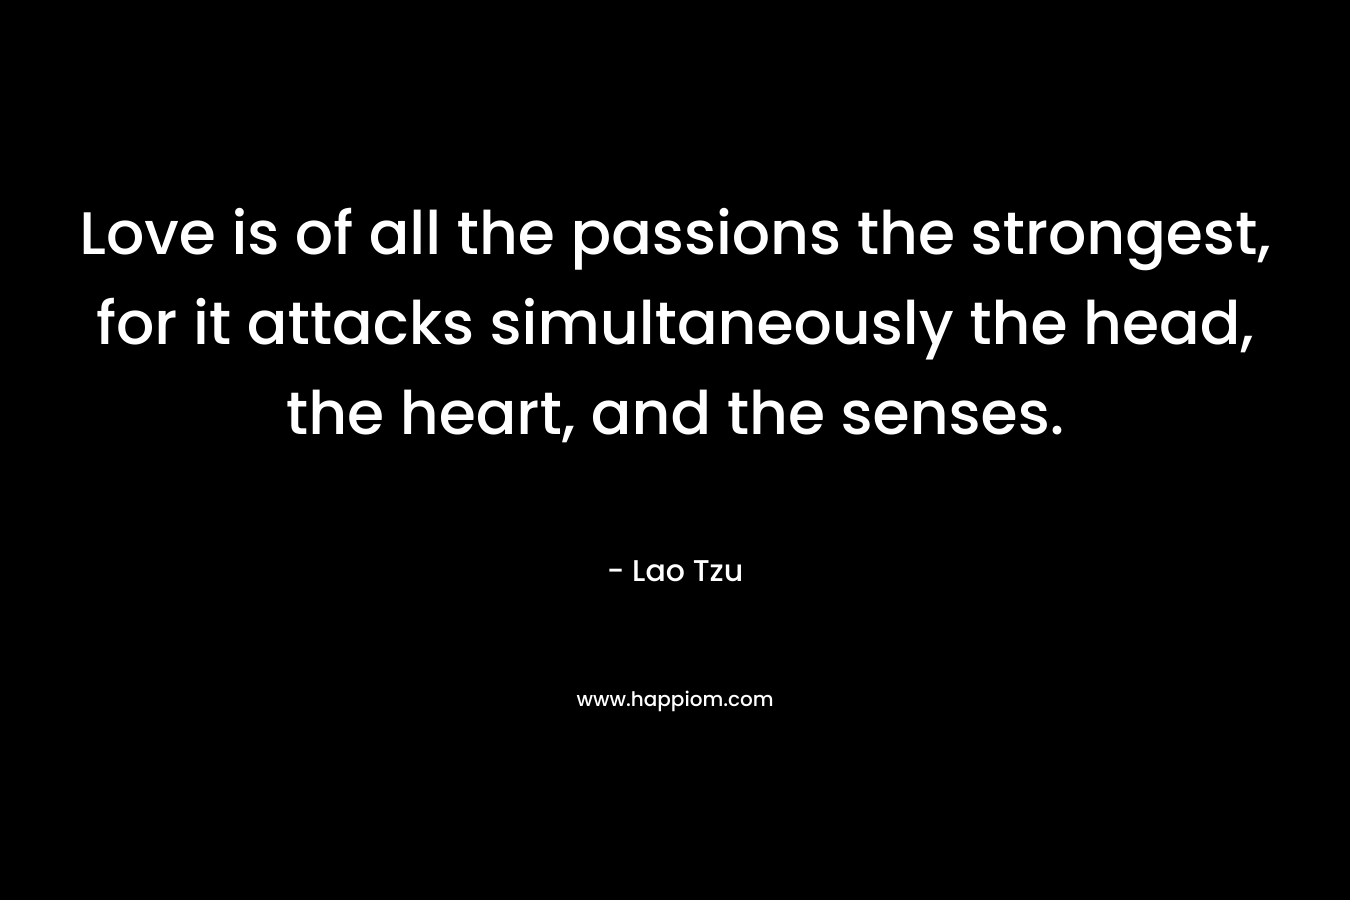 Love is of all the passions the strongest, for it attacks simultaneously the head, the heart, and the senses. – Lao Tzu